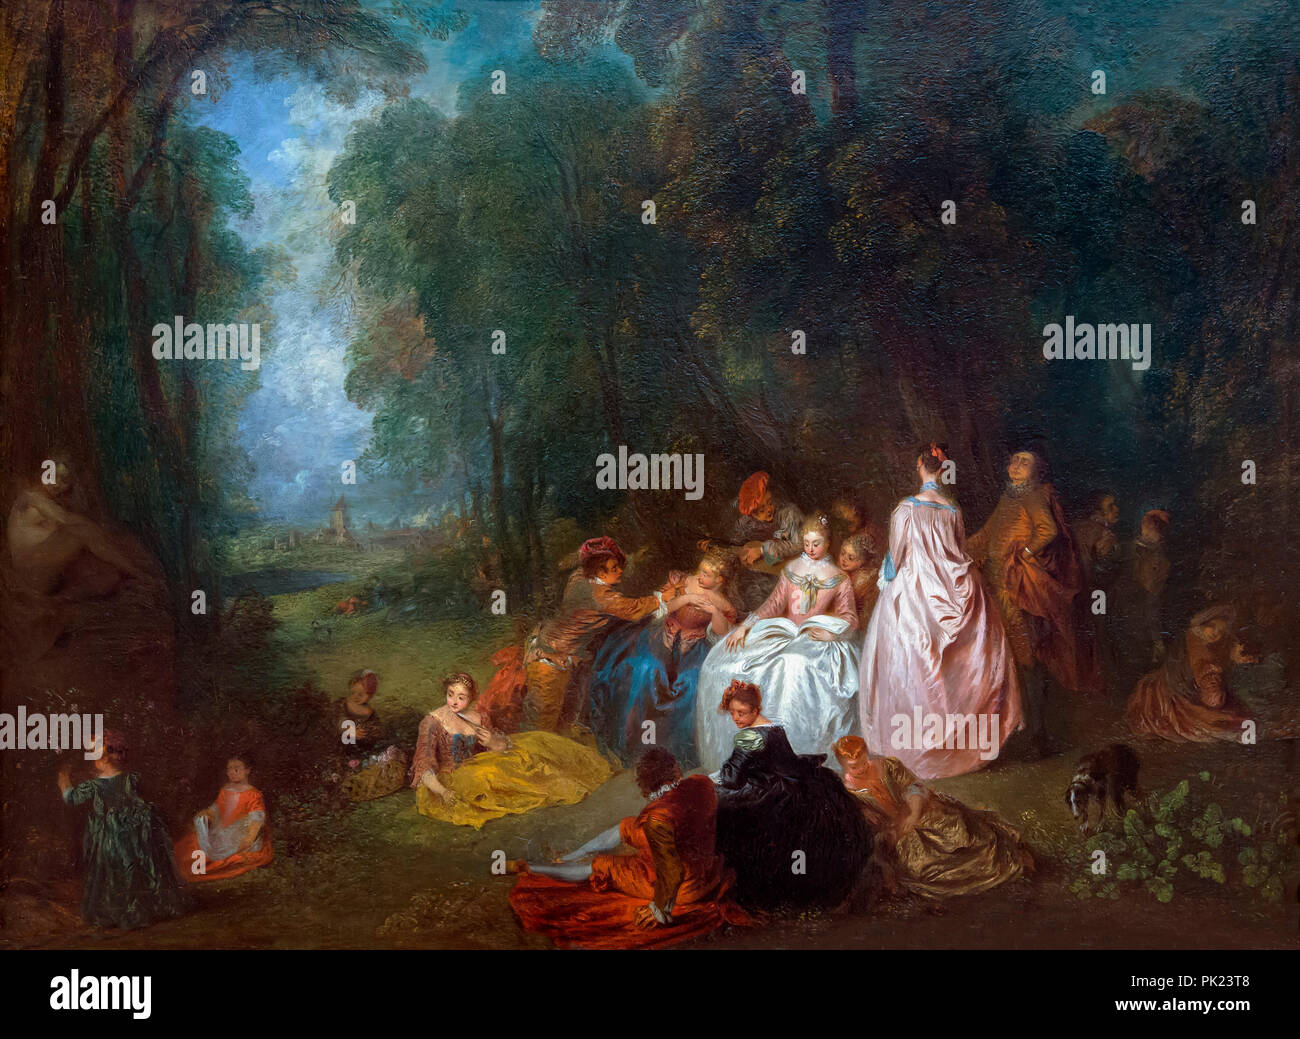 Pastoral Gathering, Jean-Antoine Watteau, Jean-Baptiste Pater, 1718-1721, Art Institute of Chicago, Chicago, Illinois, USA, North America, Stock Photo